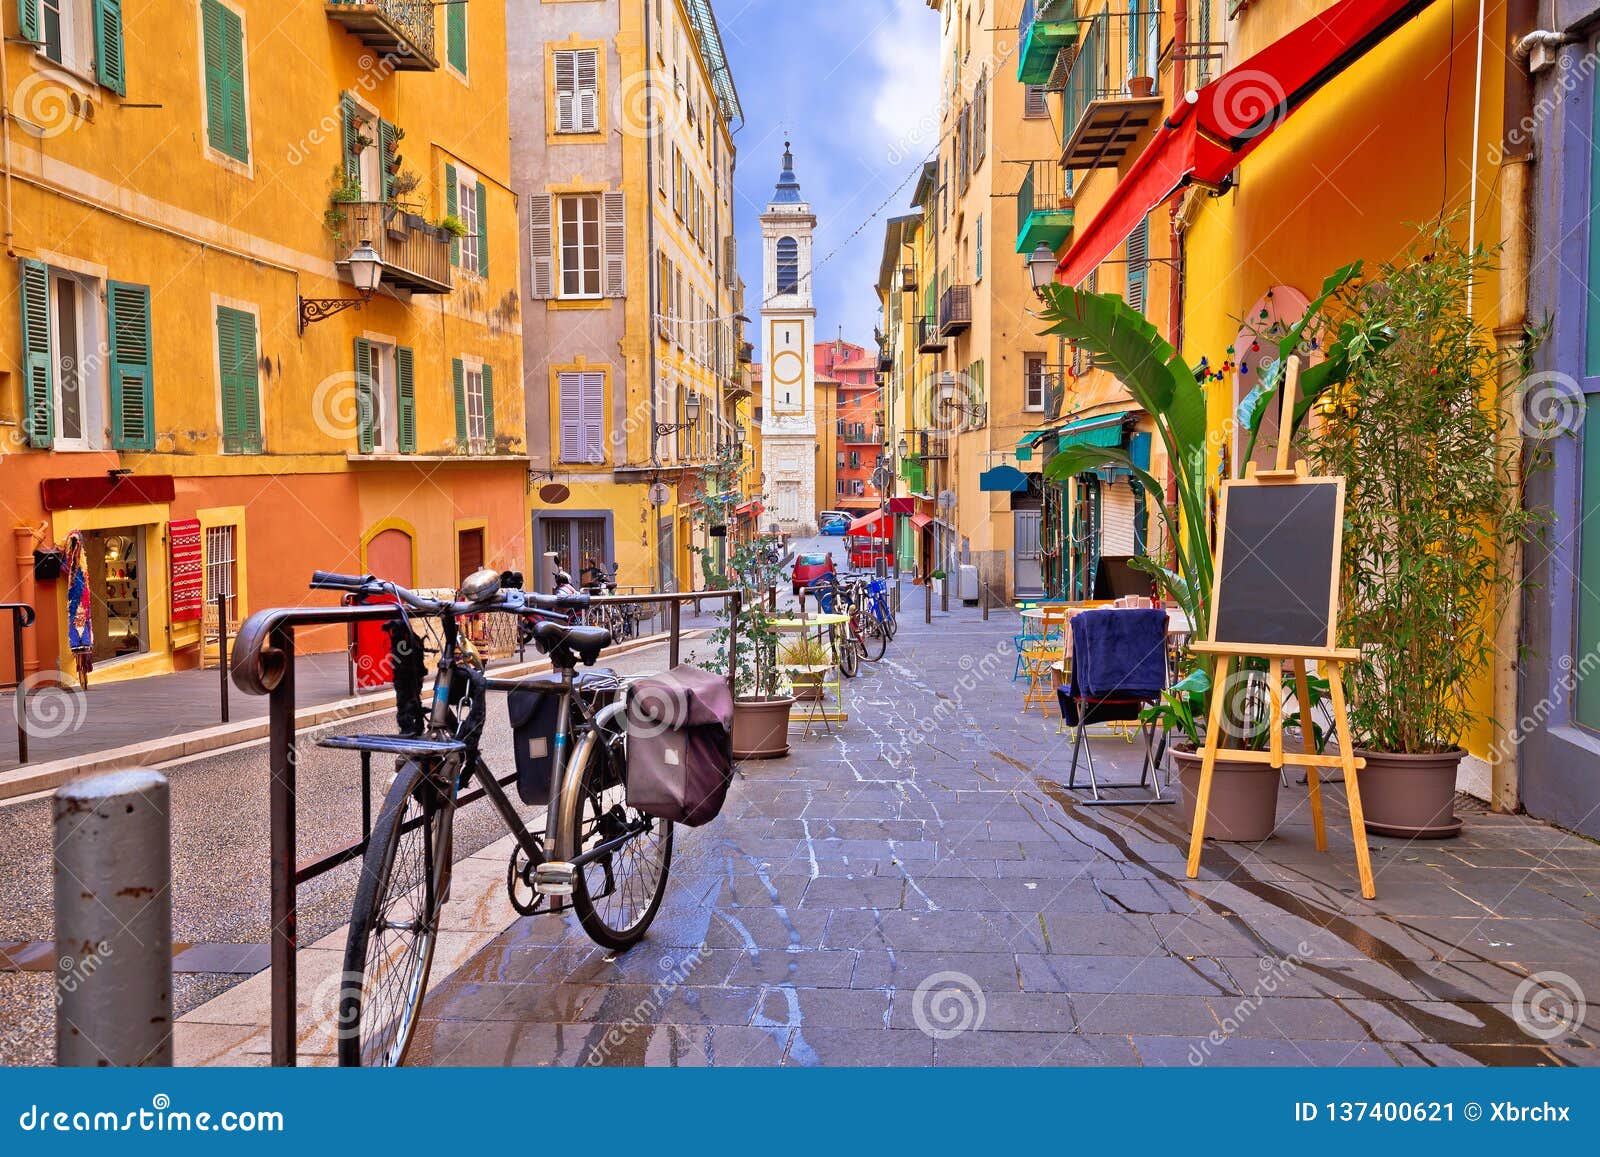 nice colorful street architecture and church view